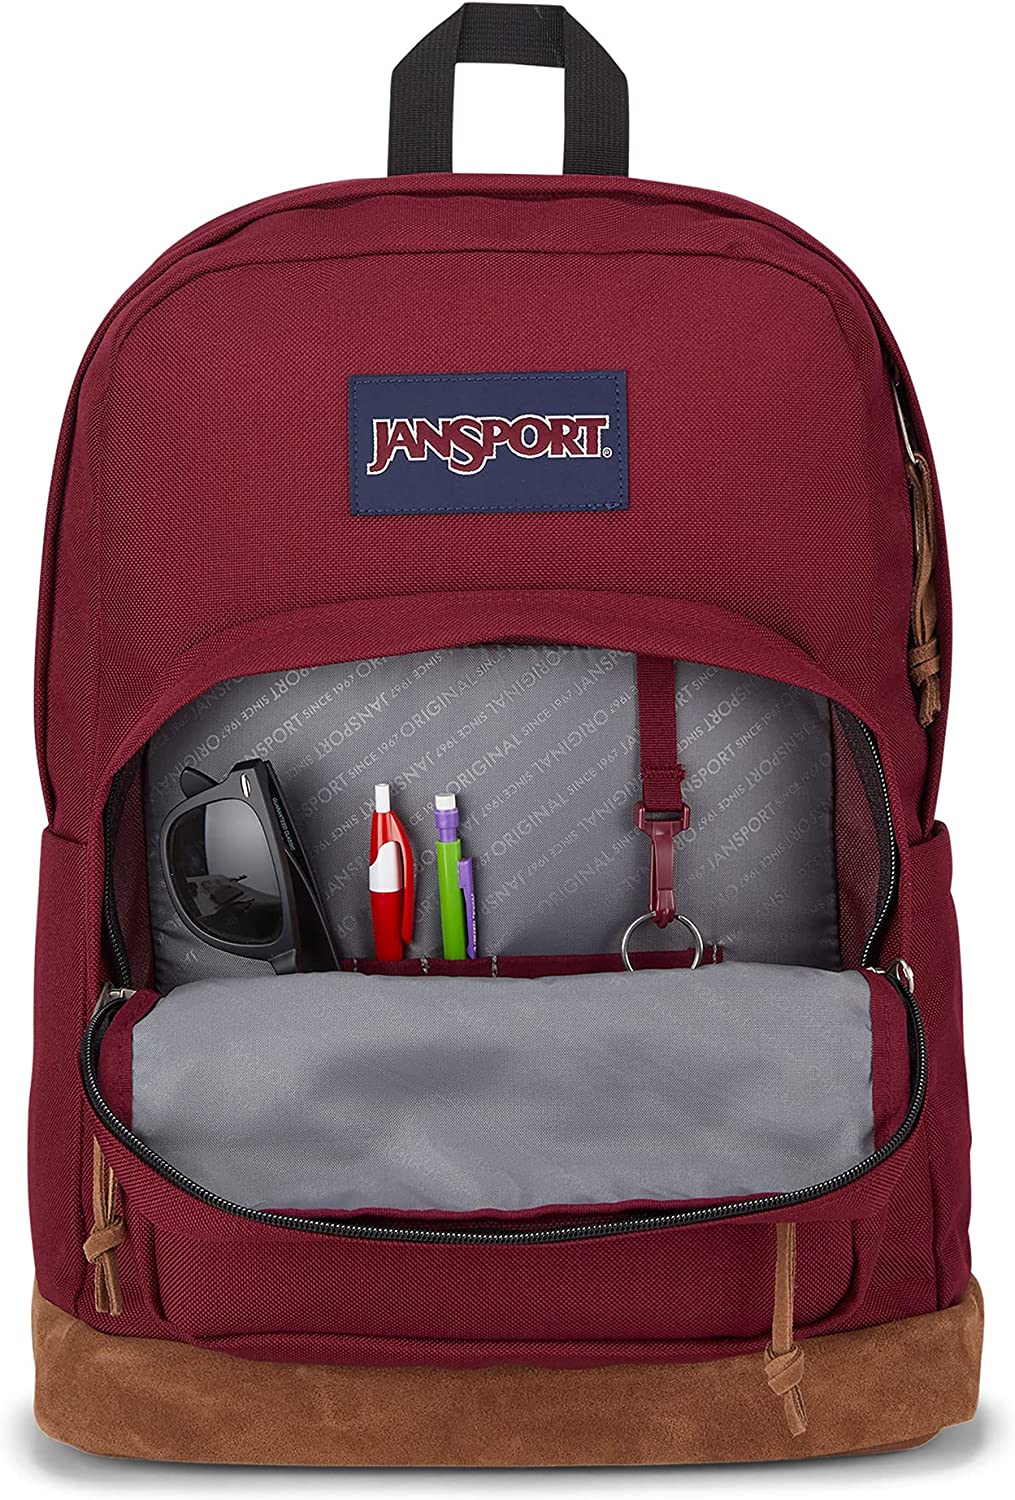 JanSport JS0A4QVA04S Right Pack Russet Red School Backpack